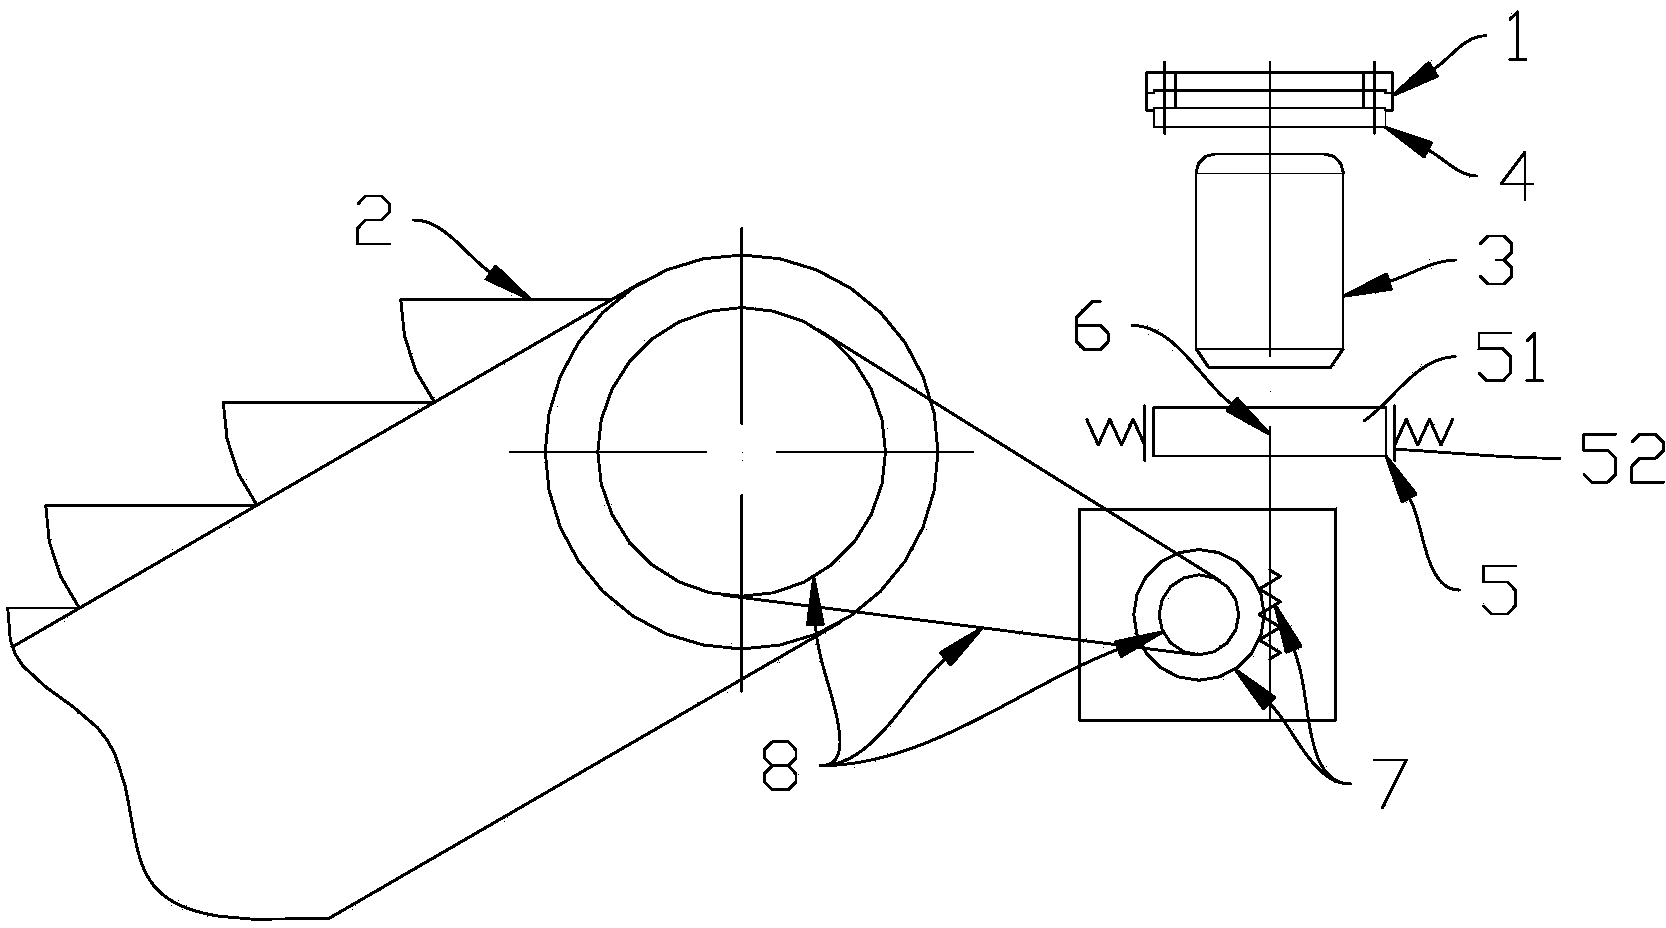 Method for testing braking capacity of escalator and/or moving pavement